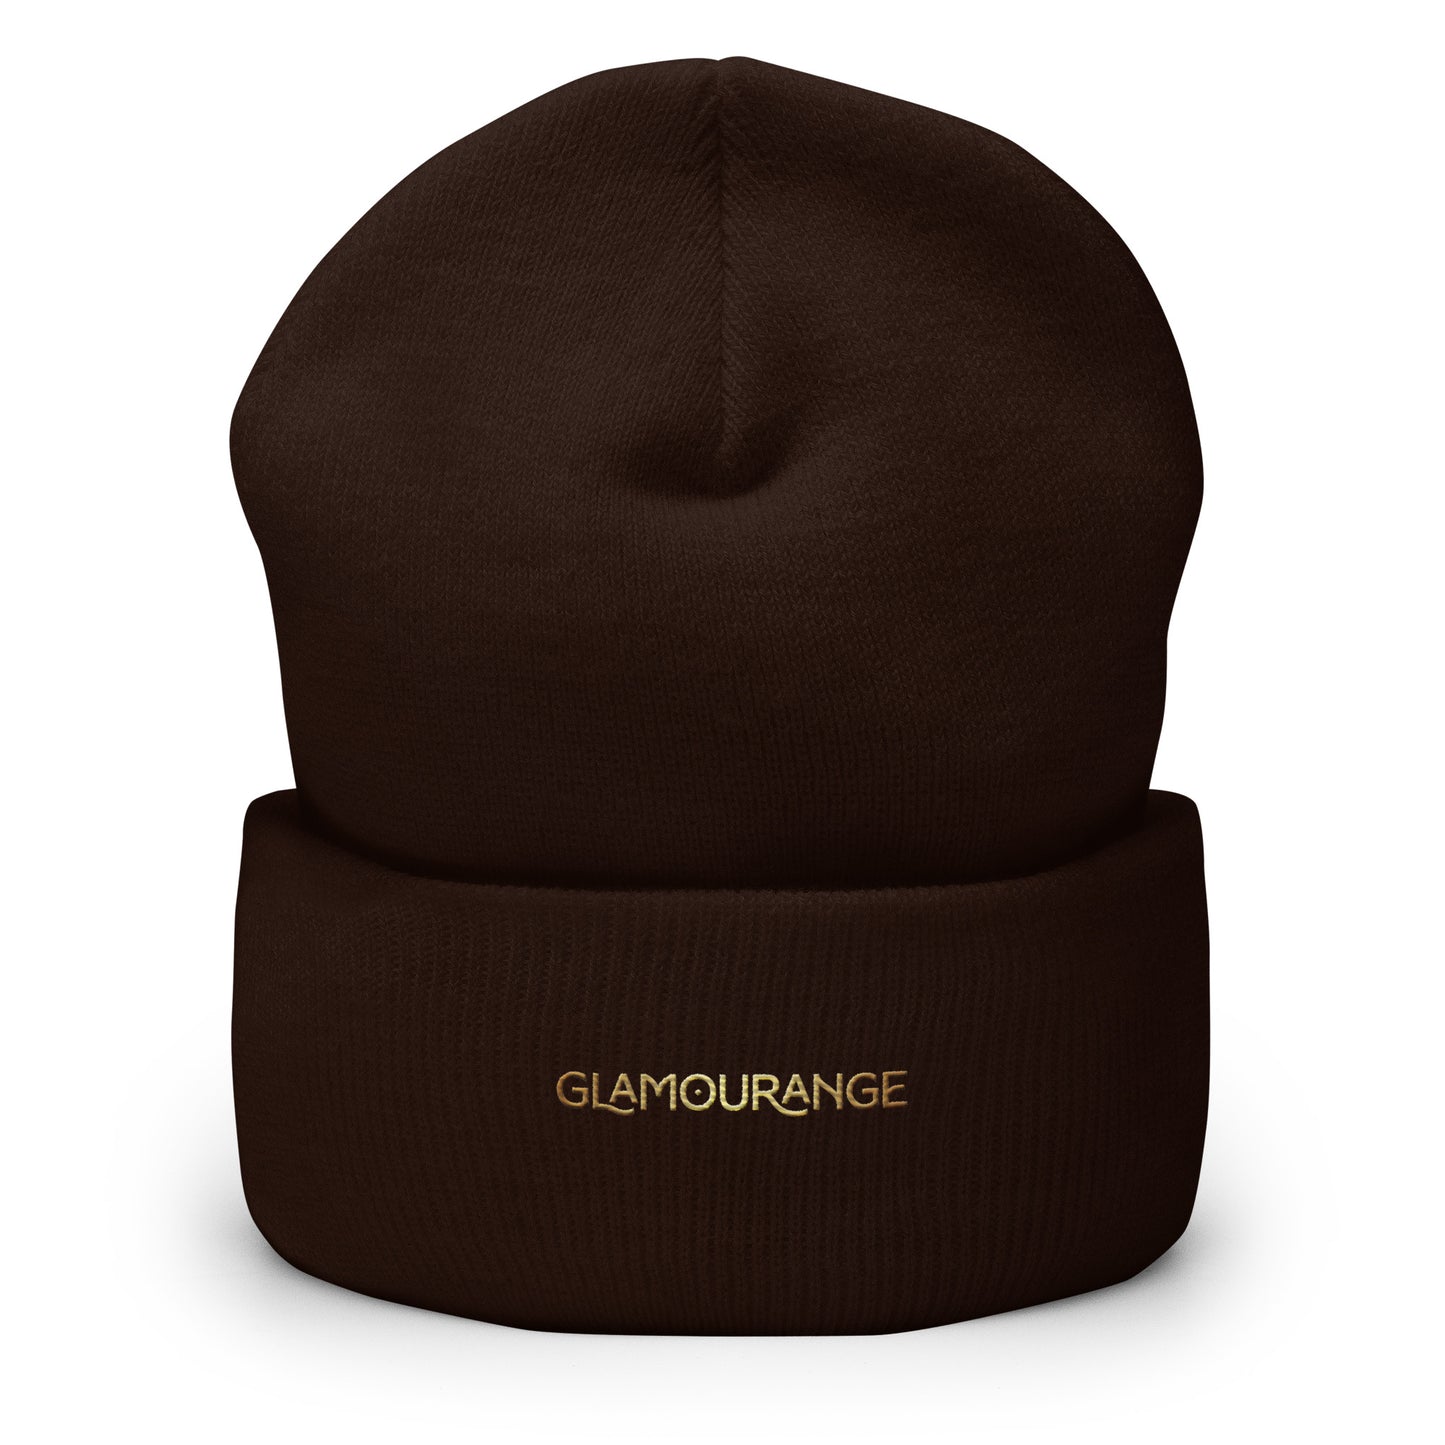 Cuffed Beanie (Glamourange Limited Editions: Small Logo - 002 Model)